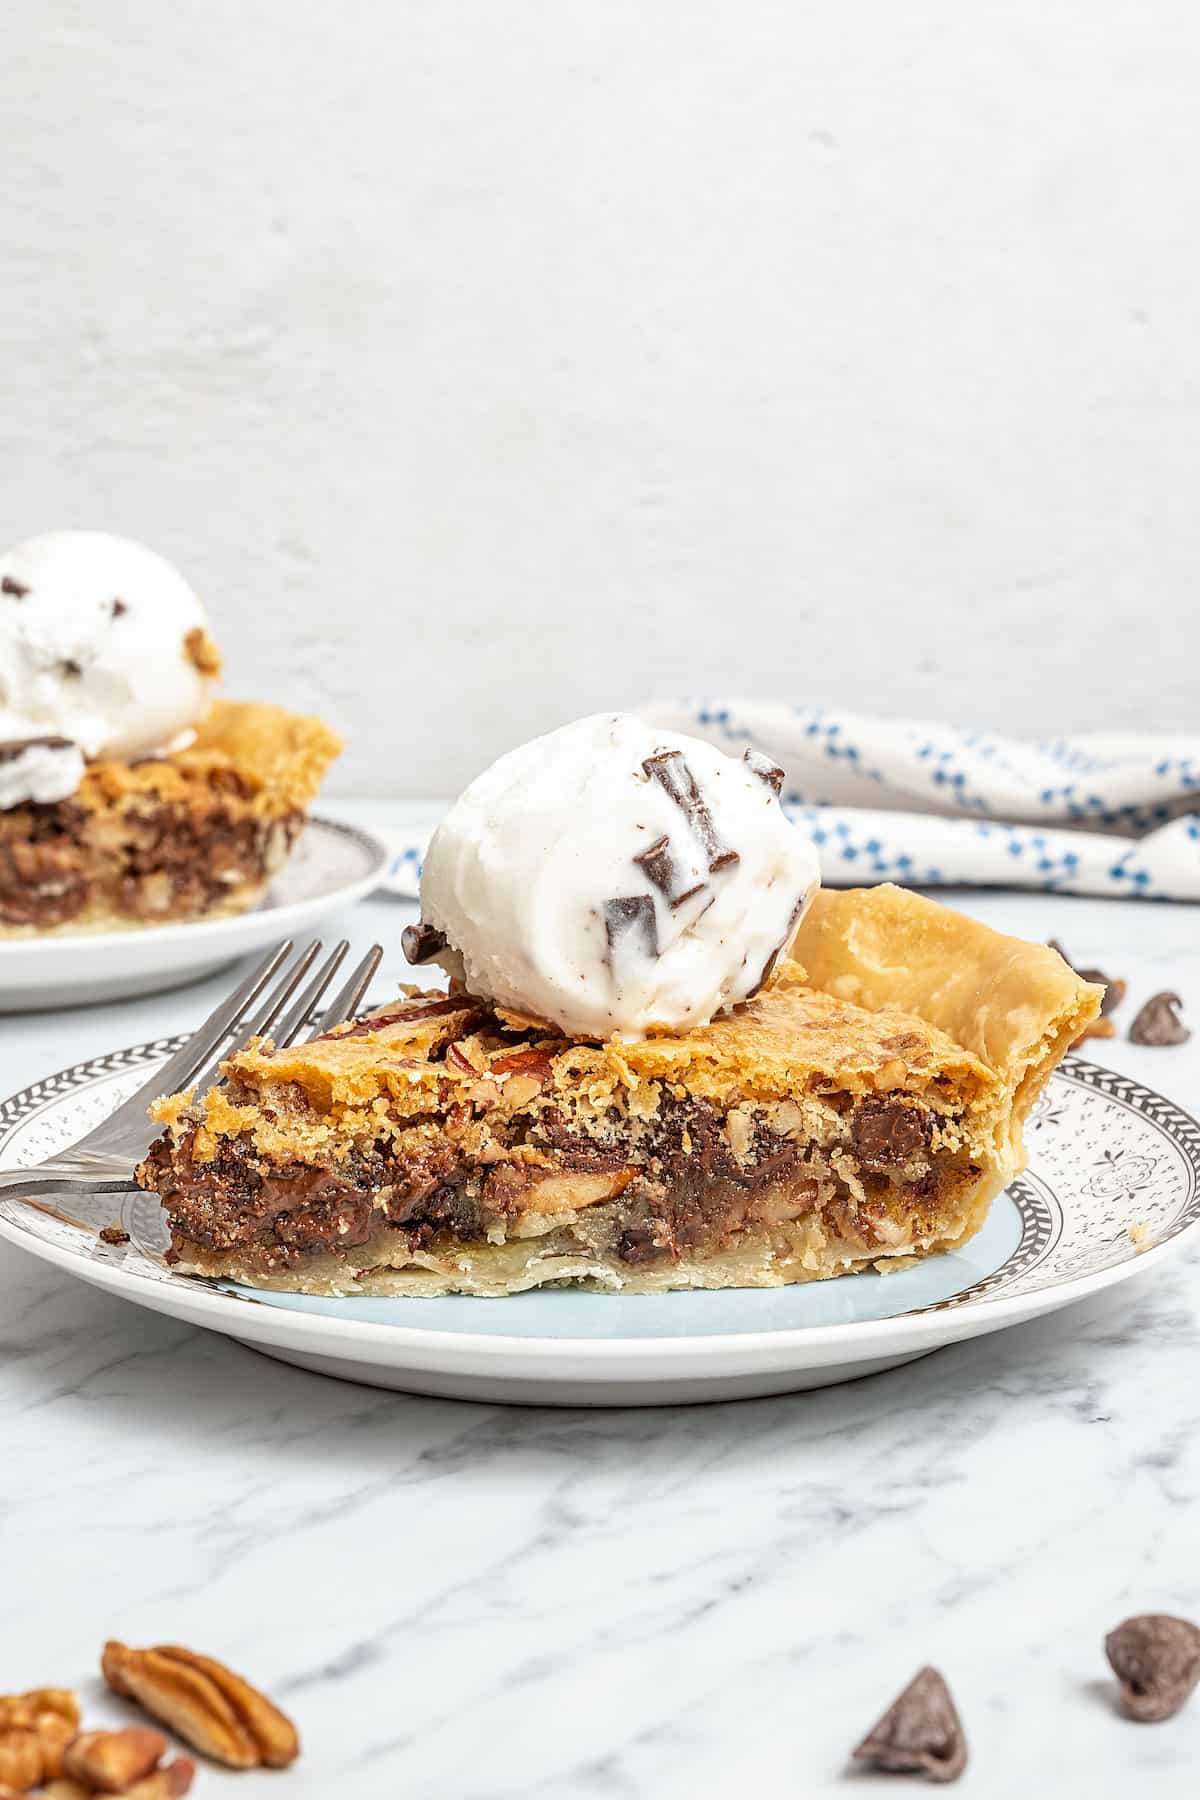 A slice of gluten-free chocolate chip cookie pie on a plate, topped with chocolate chip vanilla ice cream.